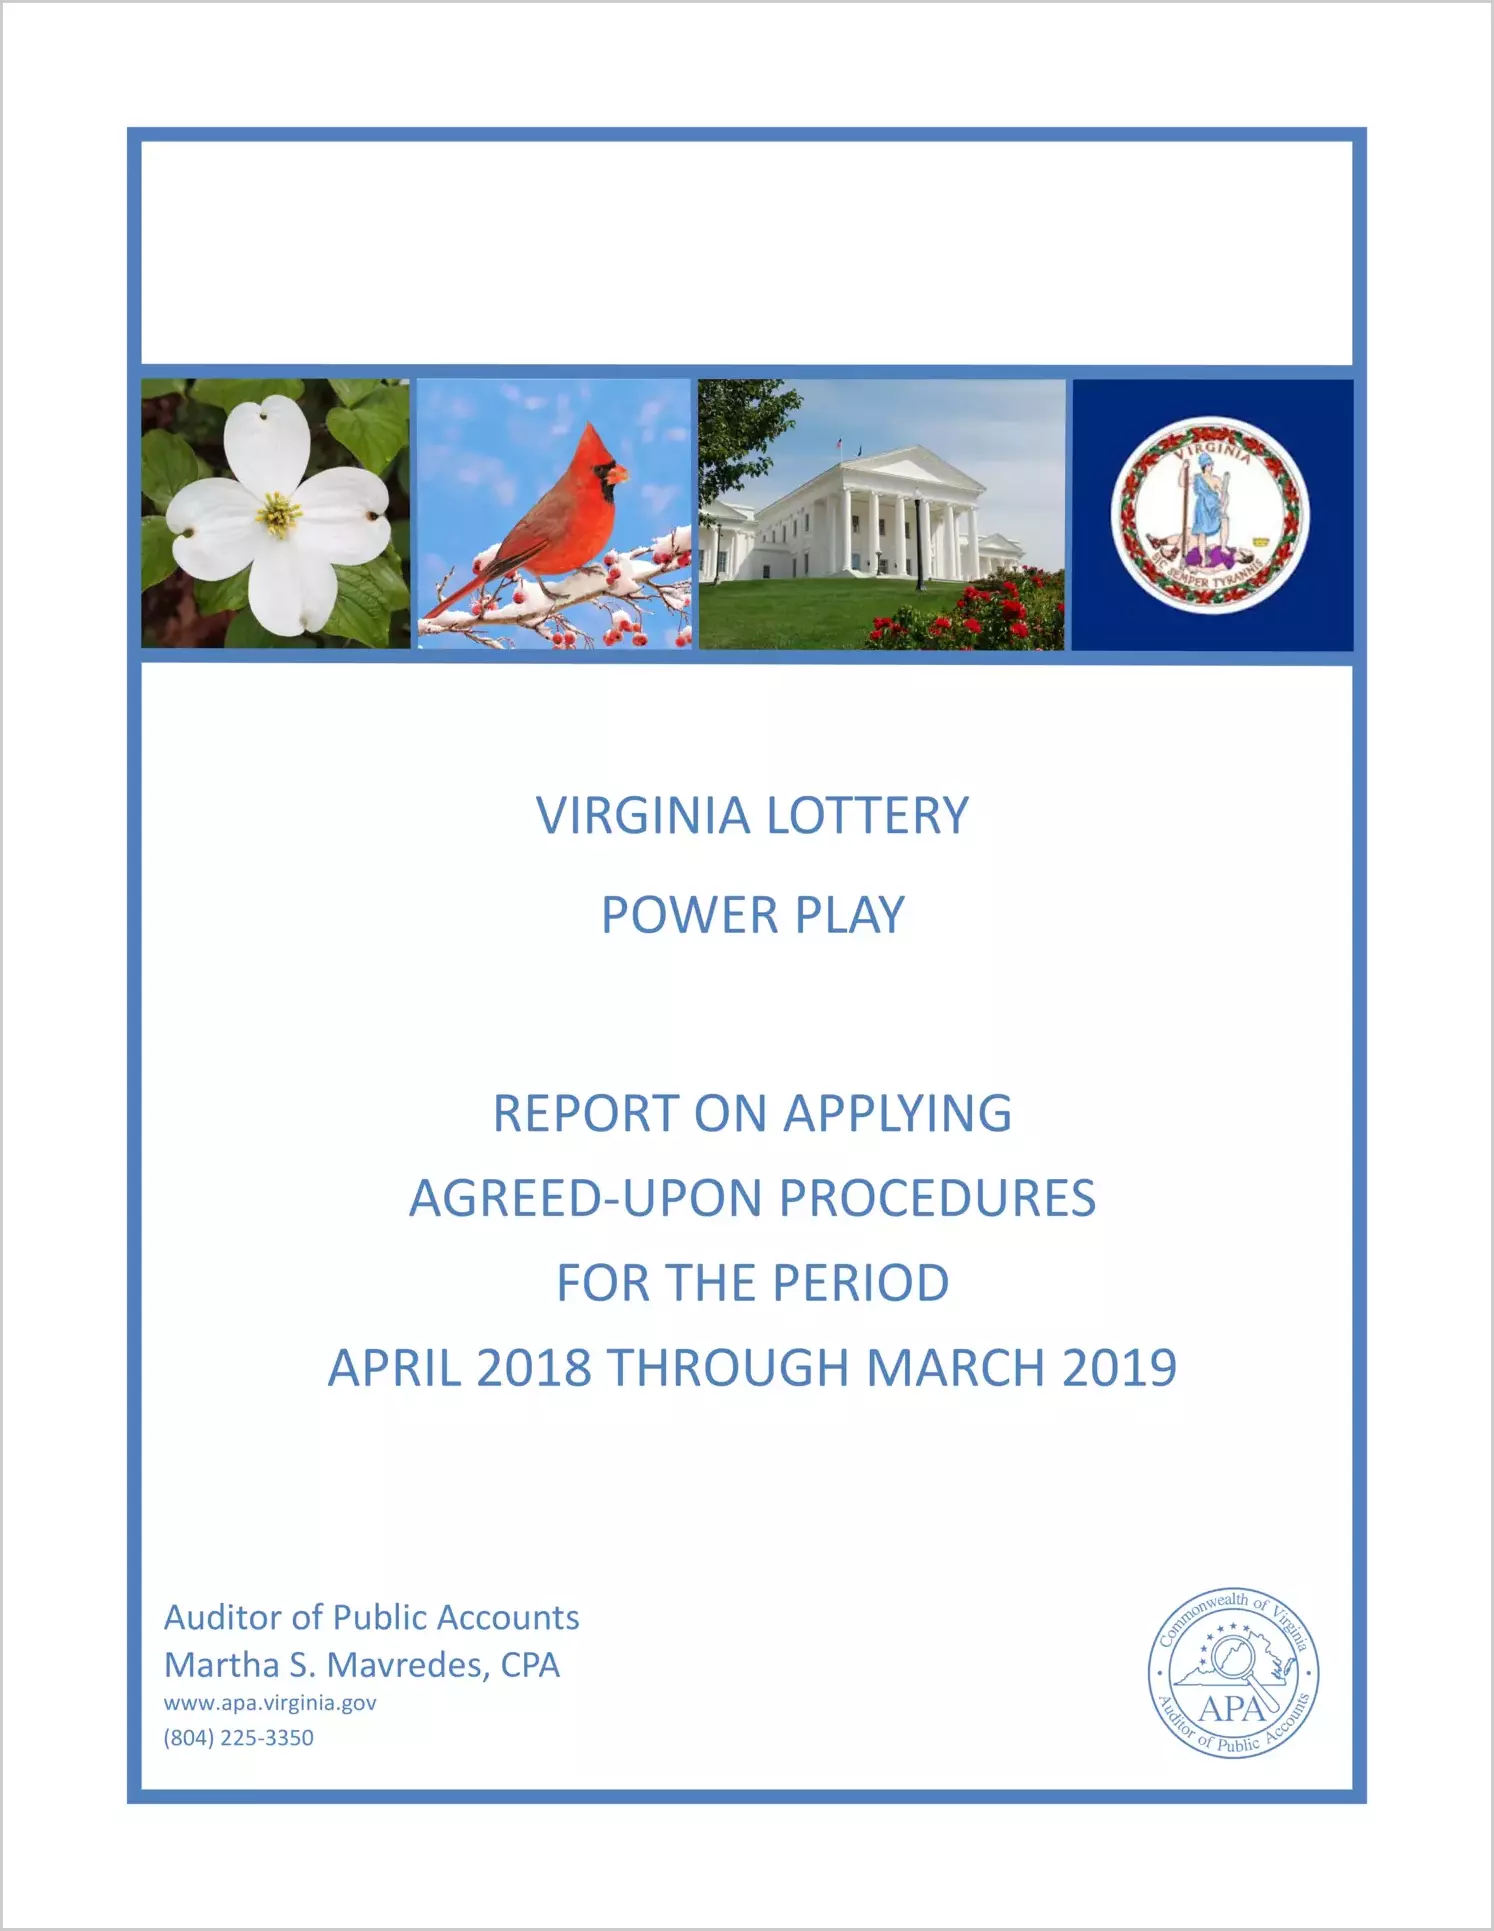 VA Lottery Power Play report on Applying Agreed-Upon Procedures for the period April 2018 through March 2019